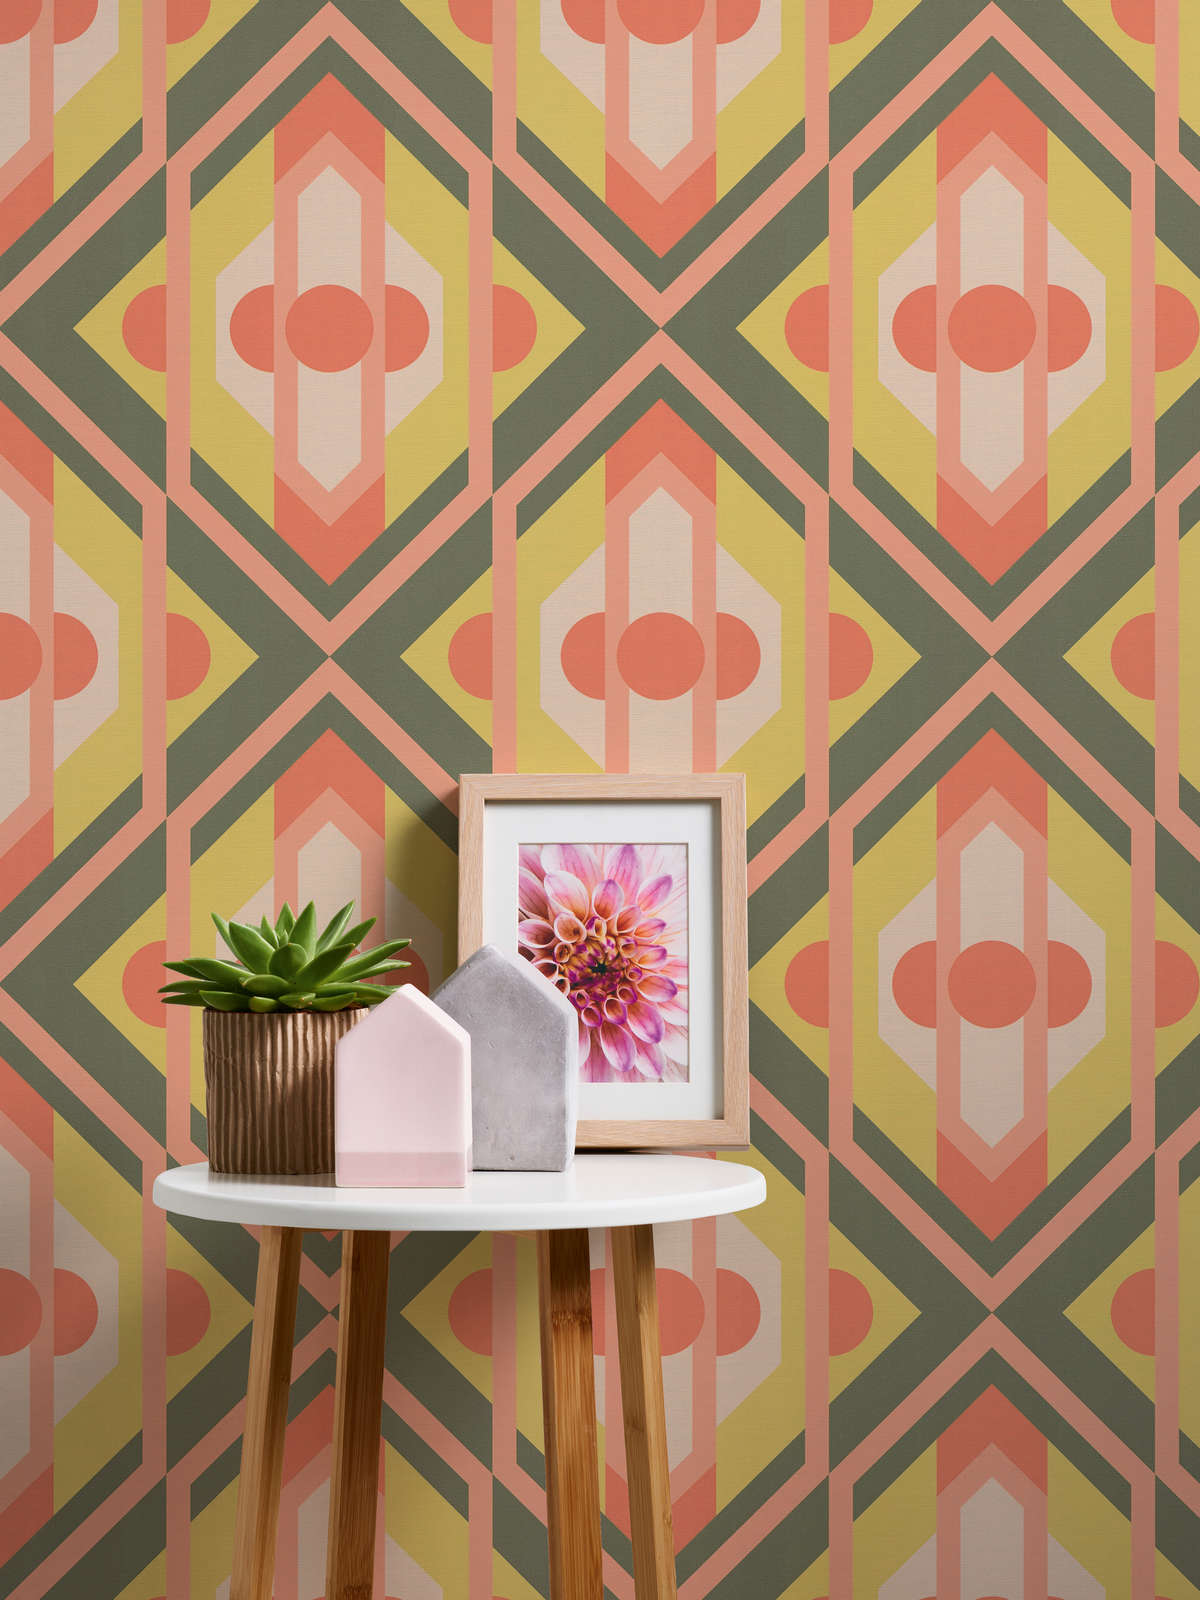             Lightly textured retro wallpaper with geometric ornaments - green, orange, red
        